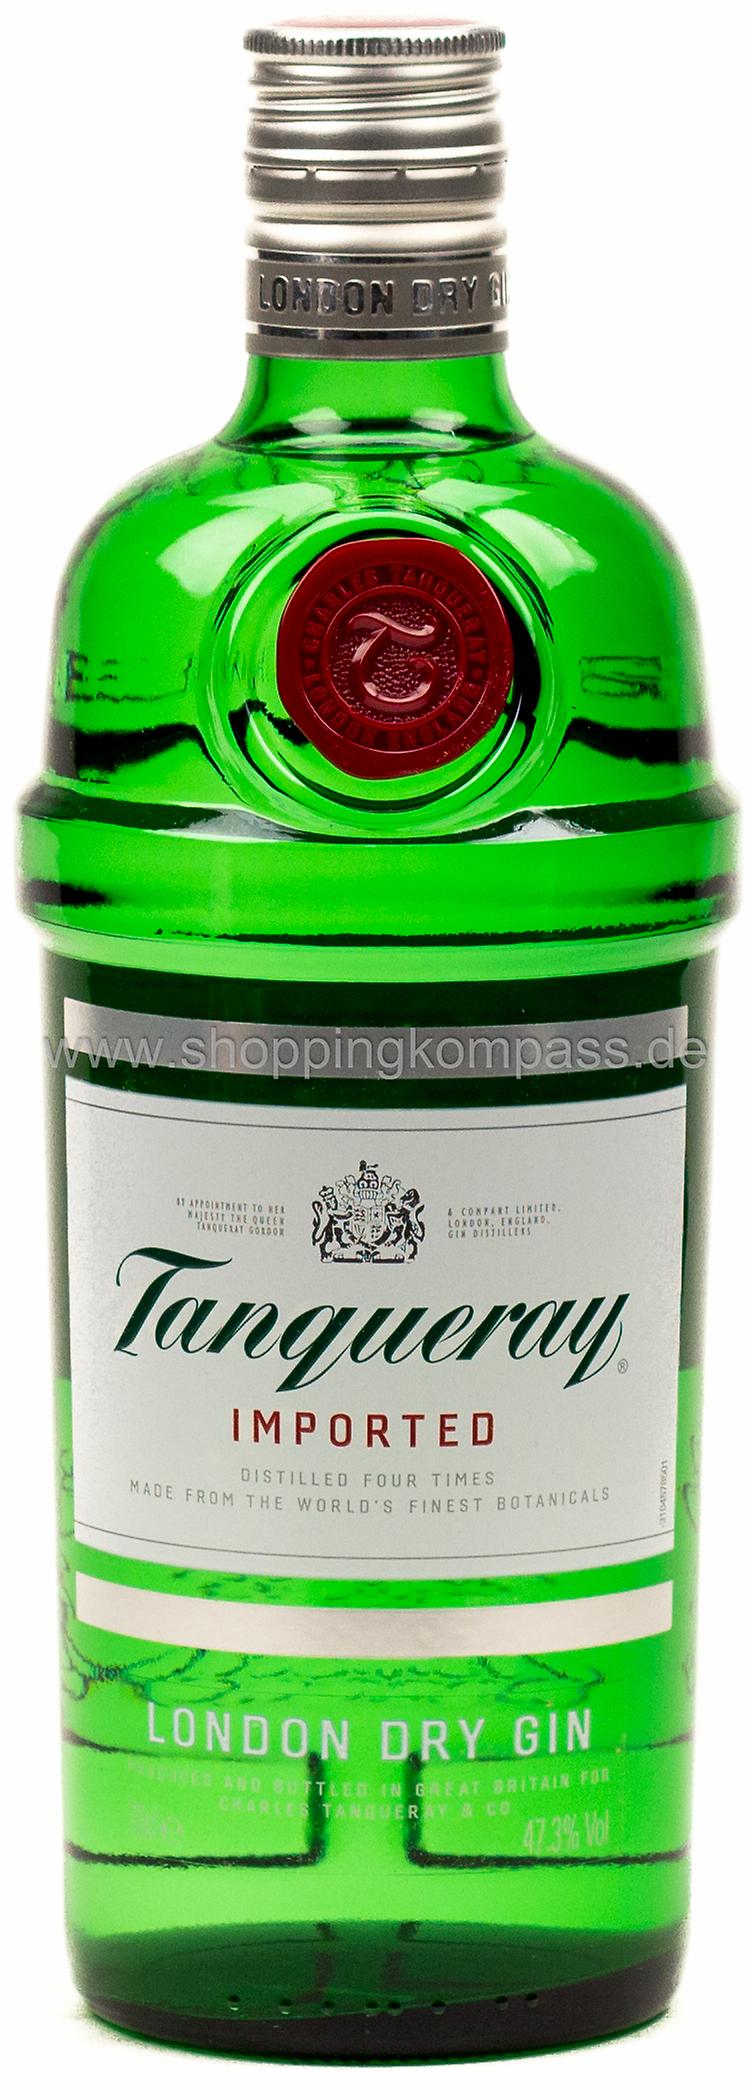 Tanqueray Imported London Dry Gin 0,7 l